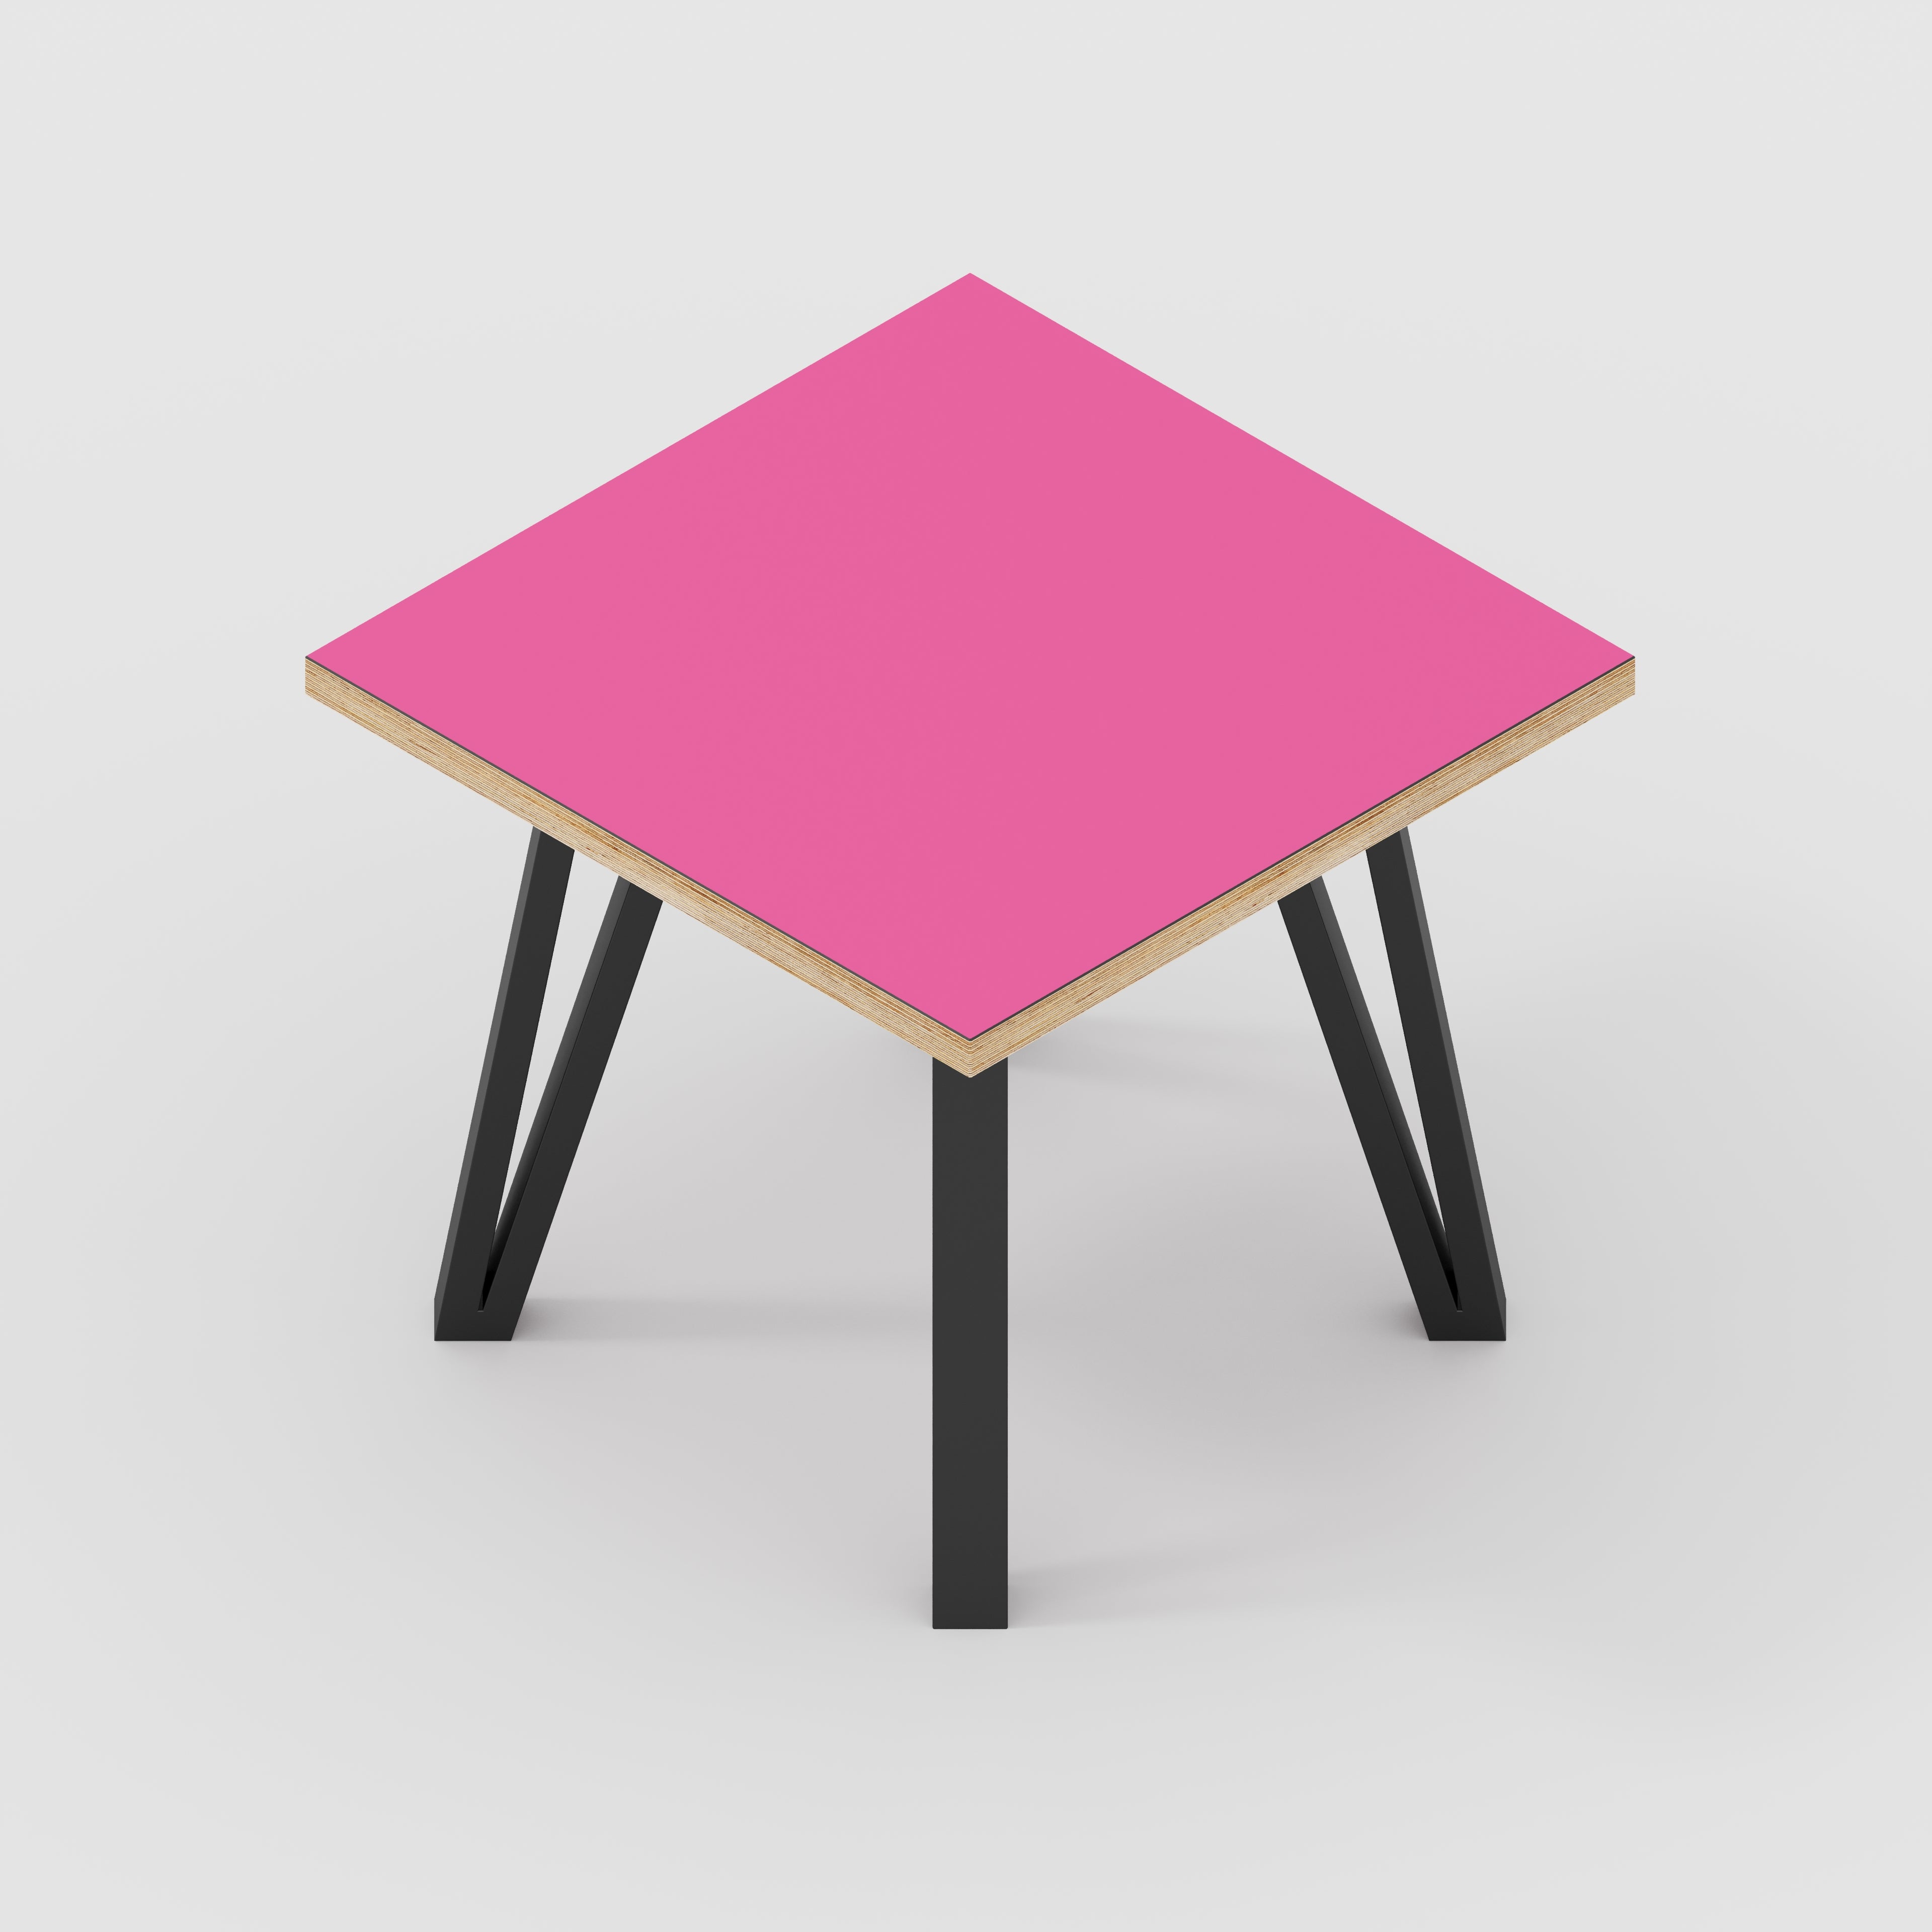 Side Table with Black Box Hairpin Legs - Formica Juicy Pink - 500(w) x 500(d) x 425(h)